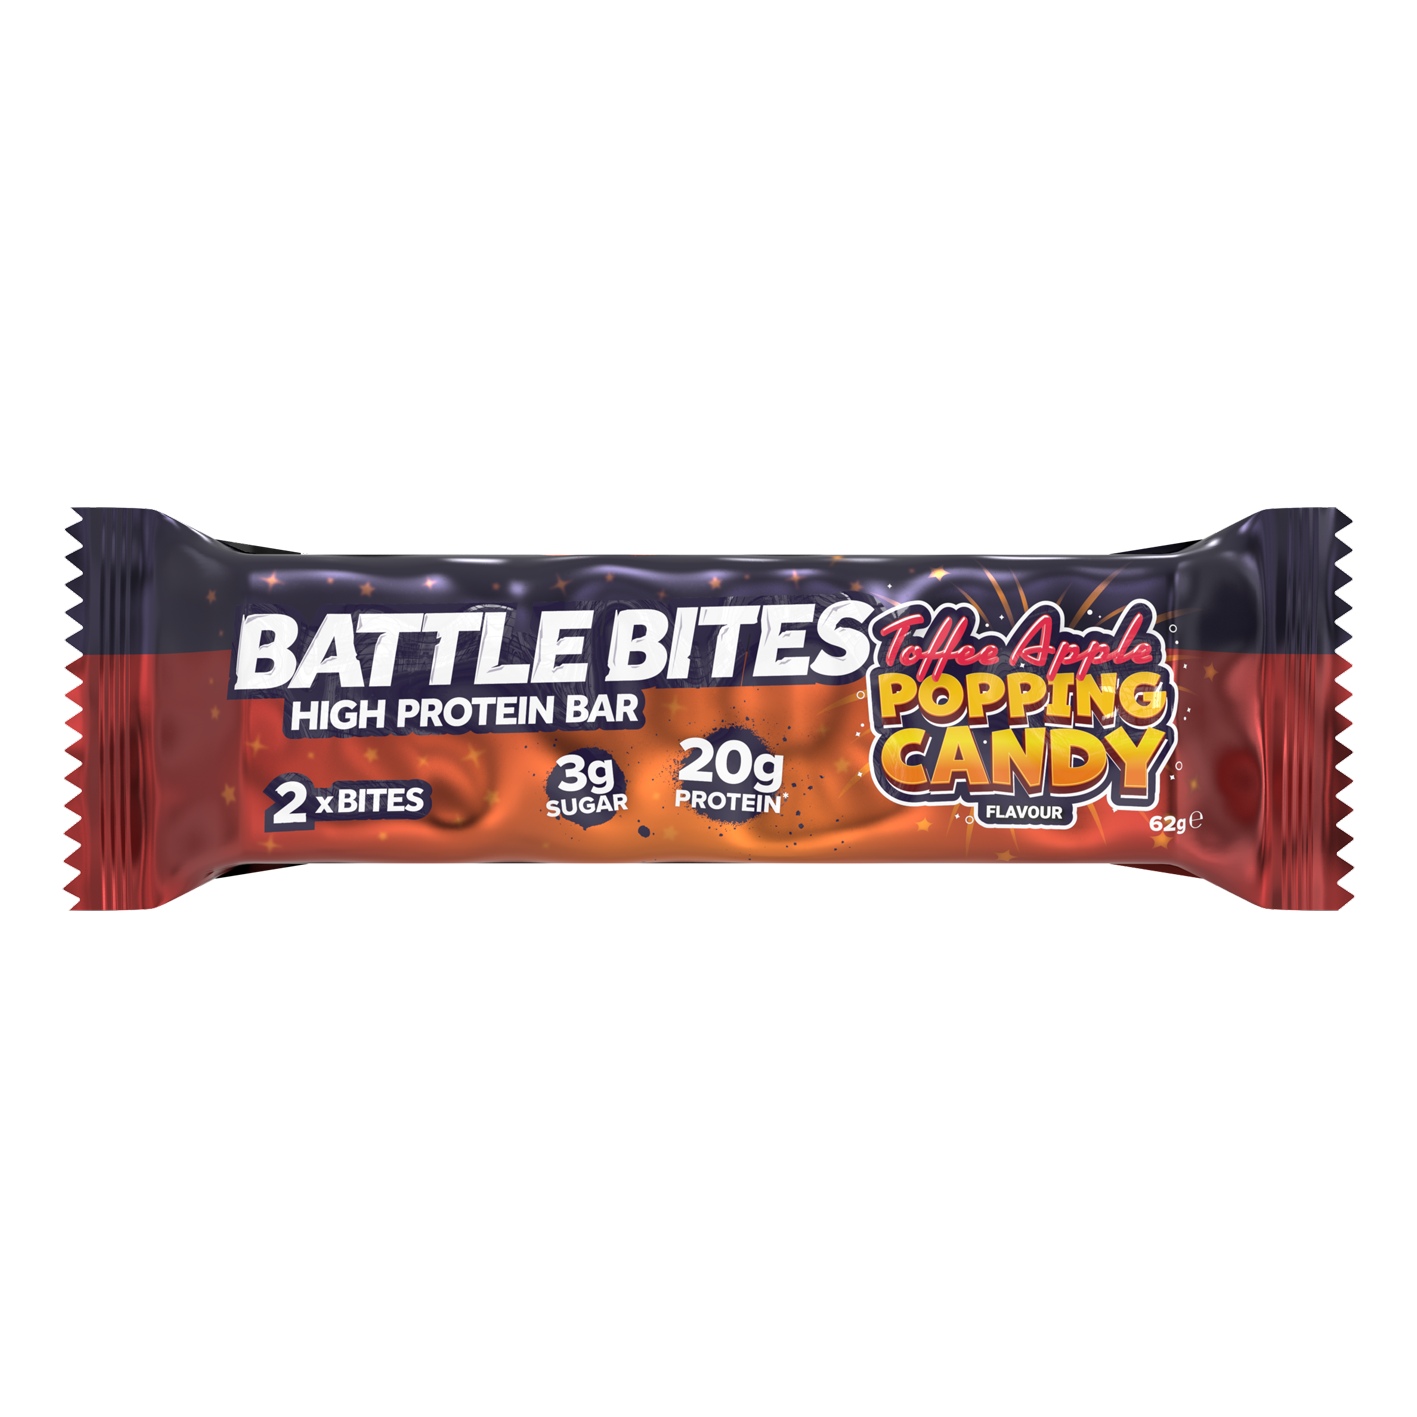 Battle Bites Popping Candy 62g - Price per box of 12